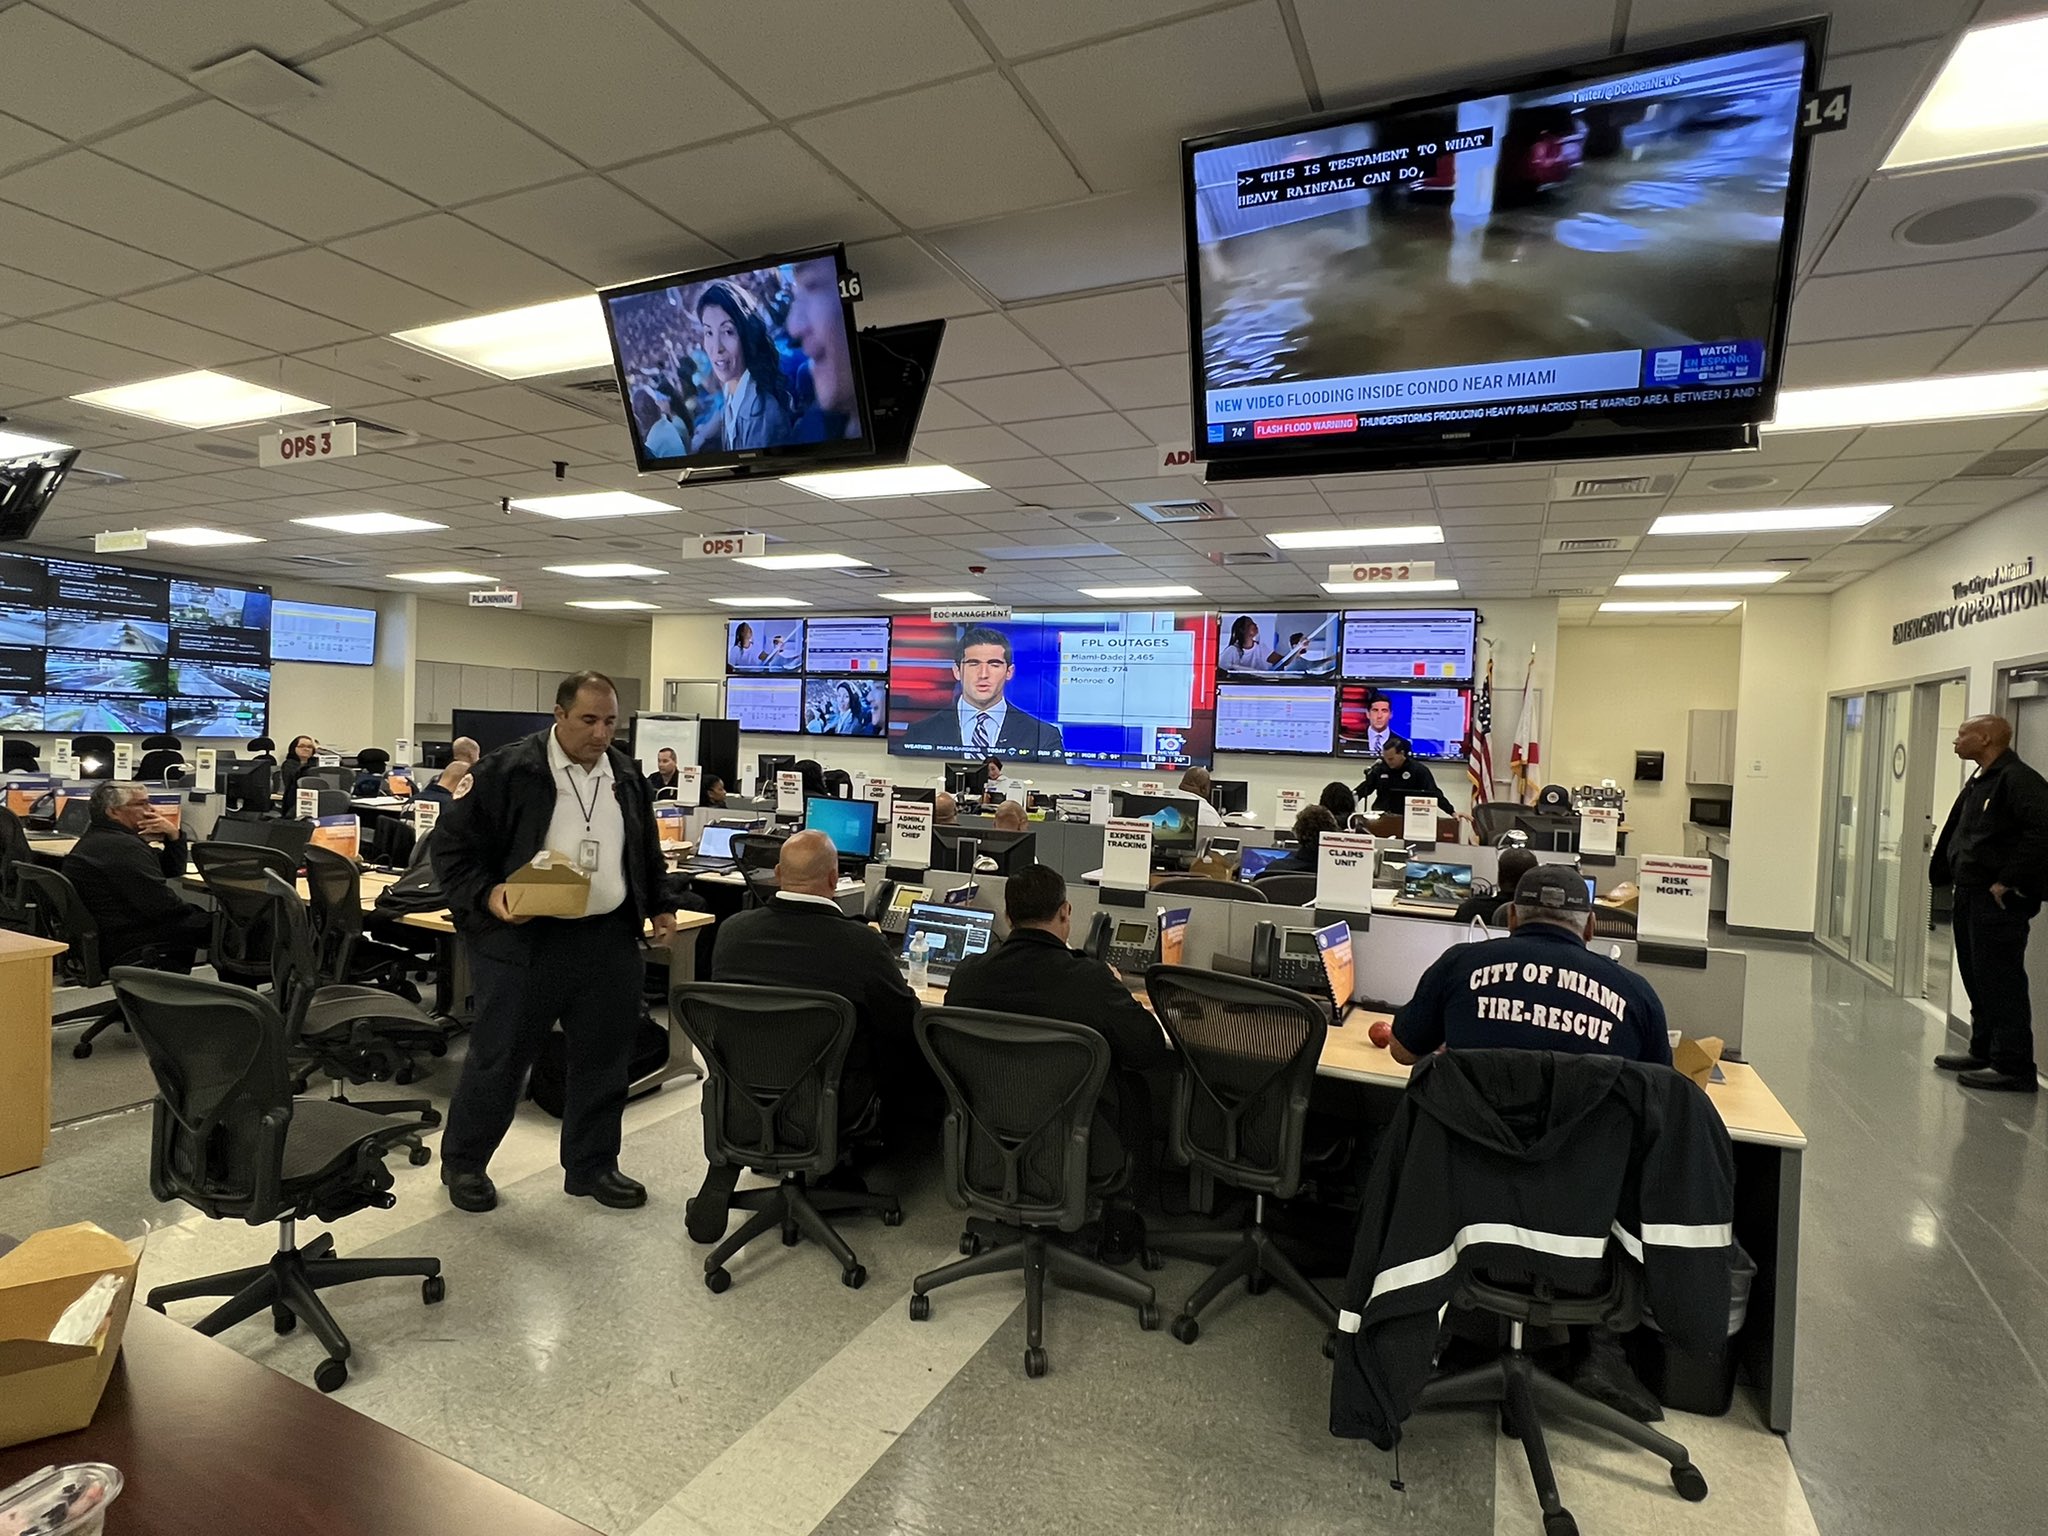 City of Miami on Twitter: "A look inside @CityofMiami Emergency Operations Center. Some of our finest men and women working around the clock to prioritize tasks during the state of emergency. Commissioner @